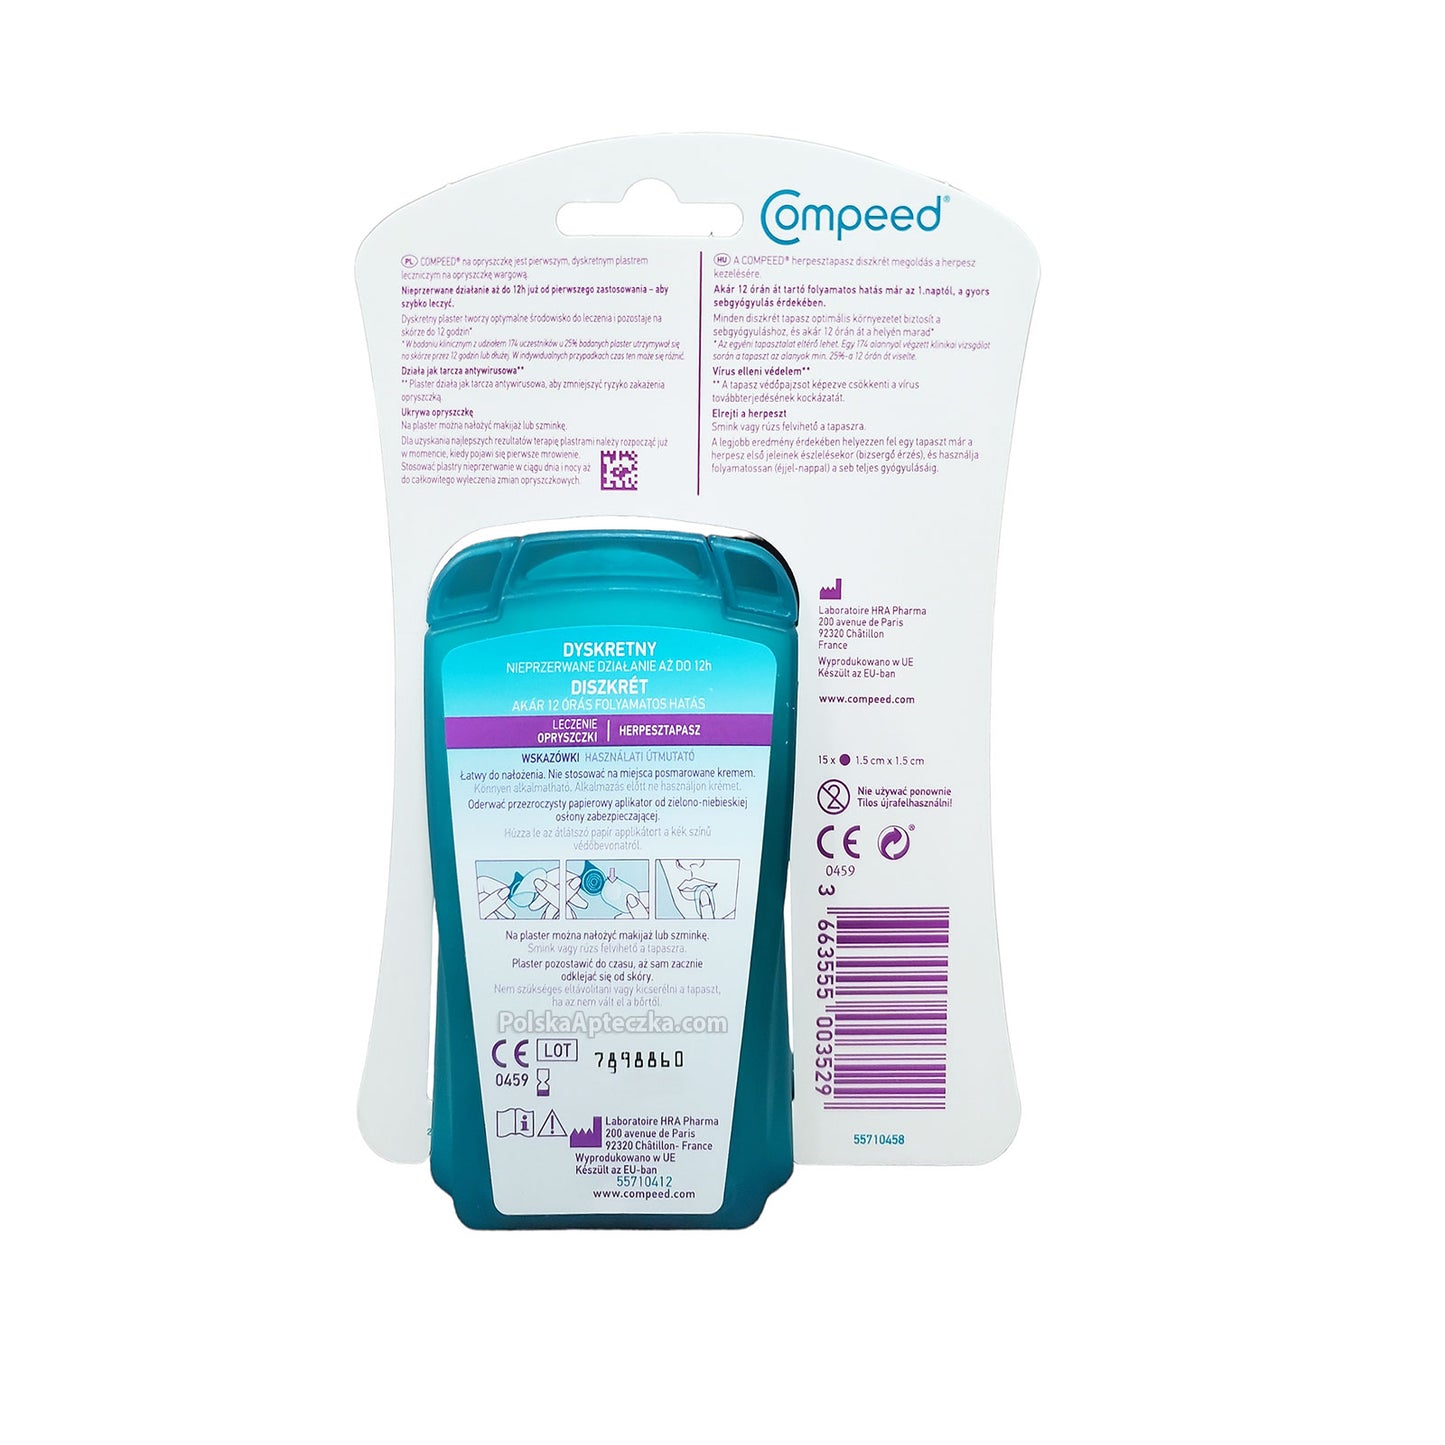 Compeed a discreet patch for cold sores